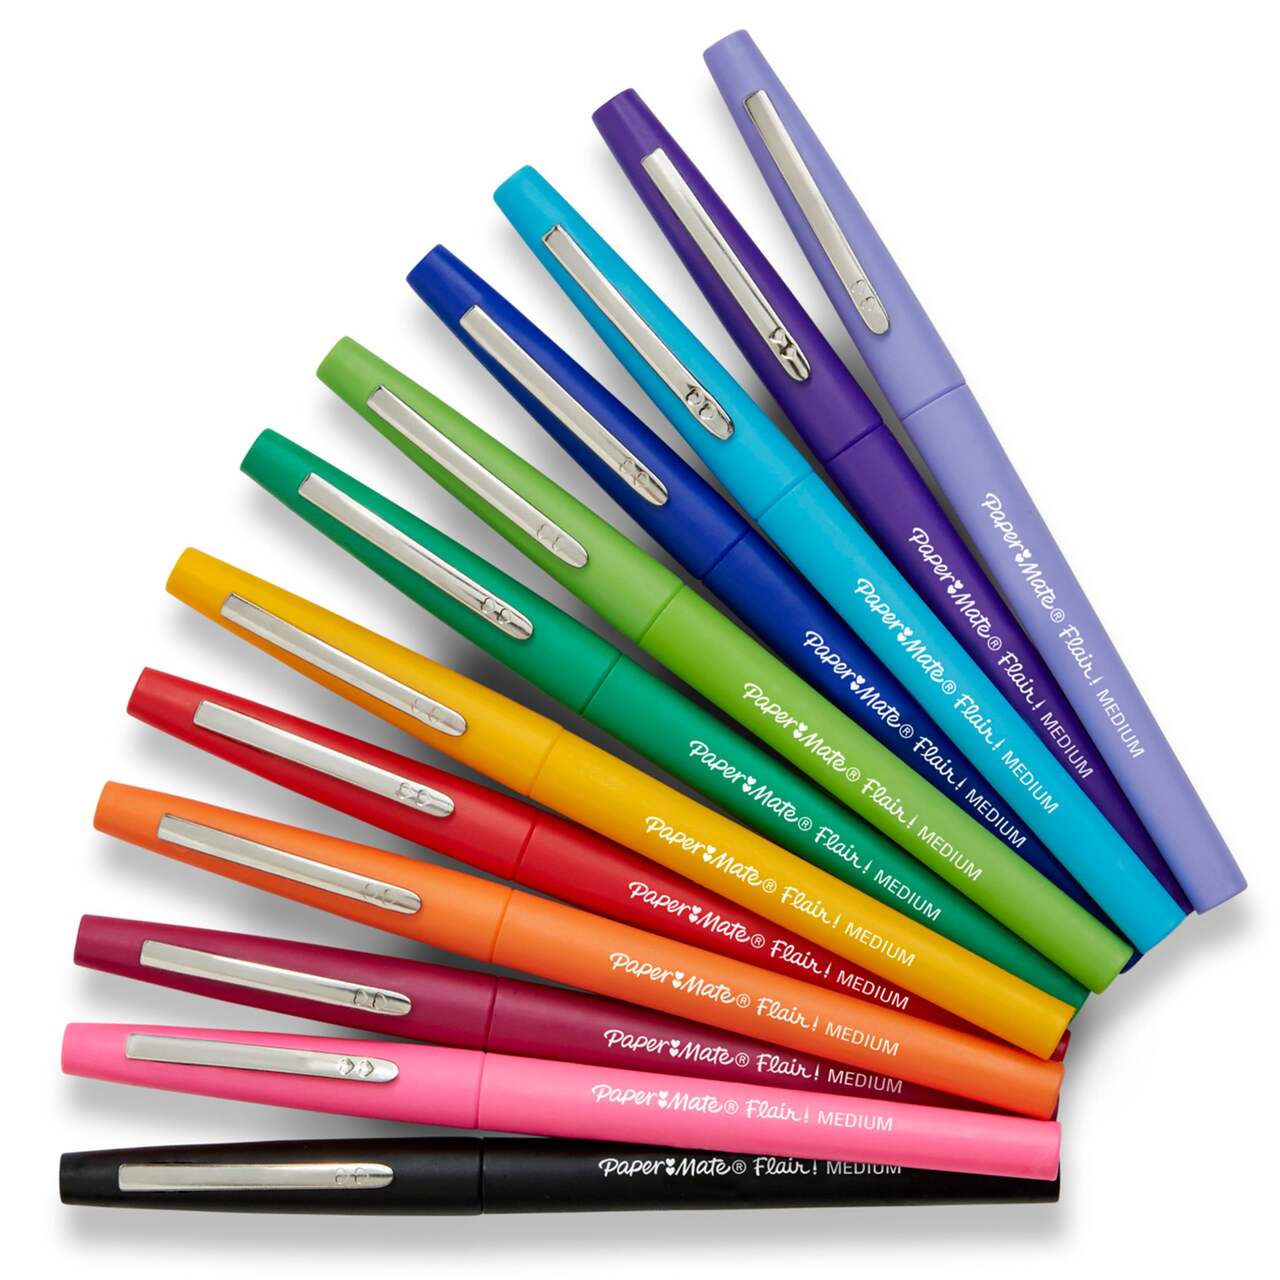 https://media-www.canadiantire.ca/product/seasonal-gardening/toys/home-office-supplies/1424602/papermate-flair-assorted-porous-pens-12-pack-a8c1f10d-dd25-4f0e-a4aa-9bd9b847d060-jpgrendition.jpg?imdensity=1&imwidth=640&impolicy=mZoom